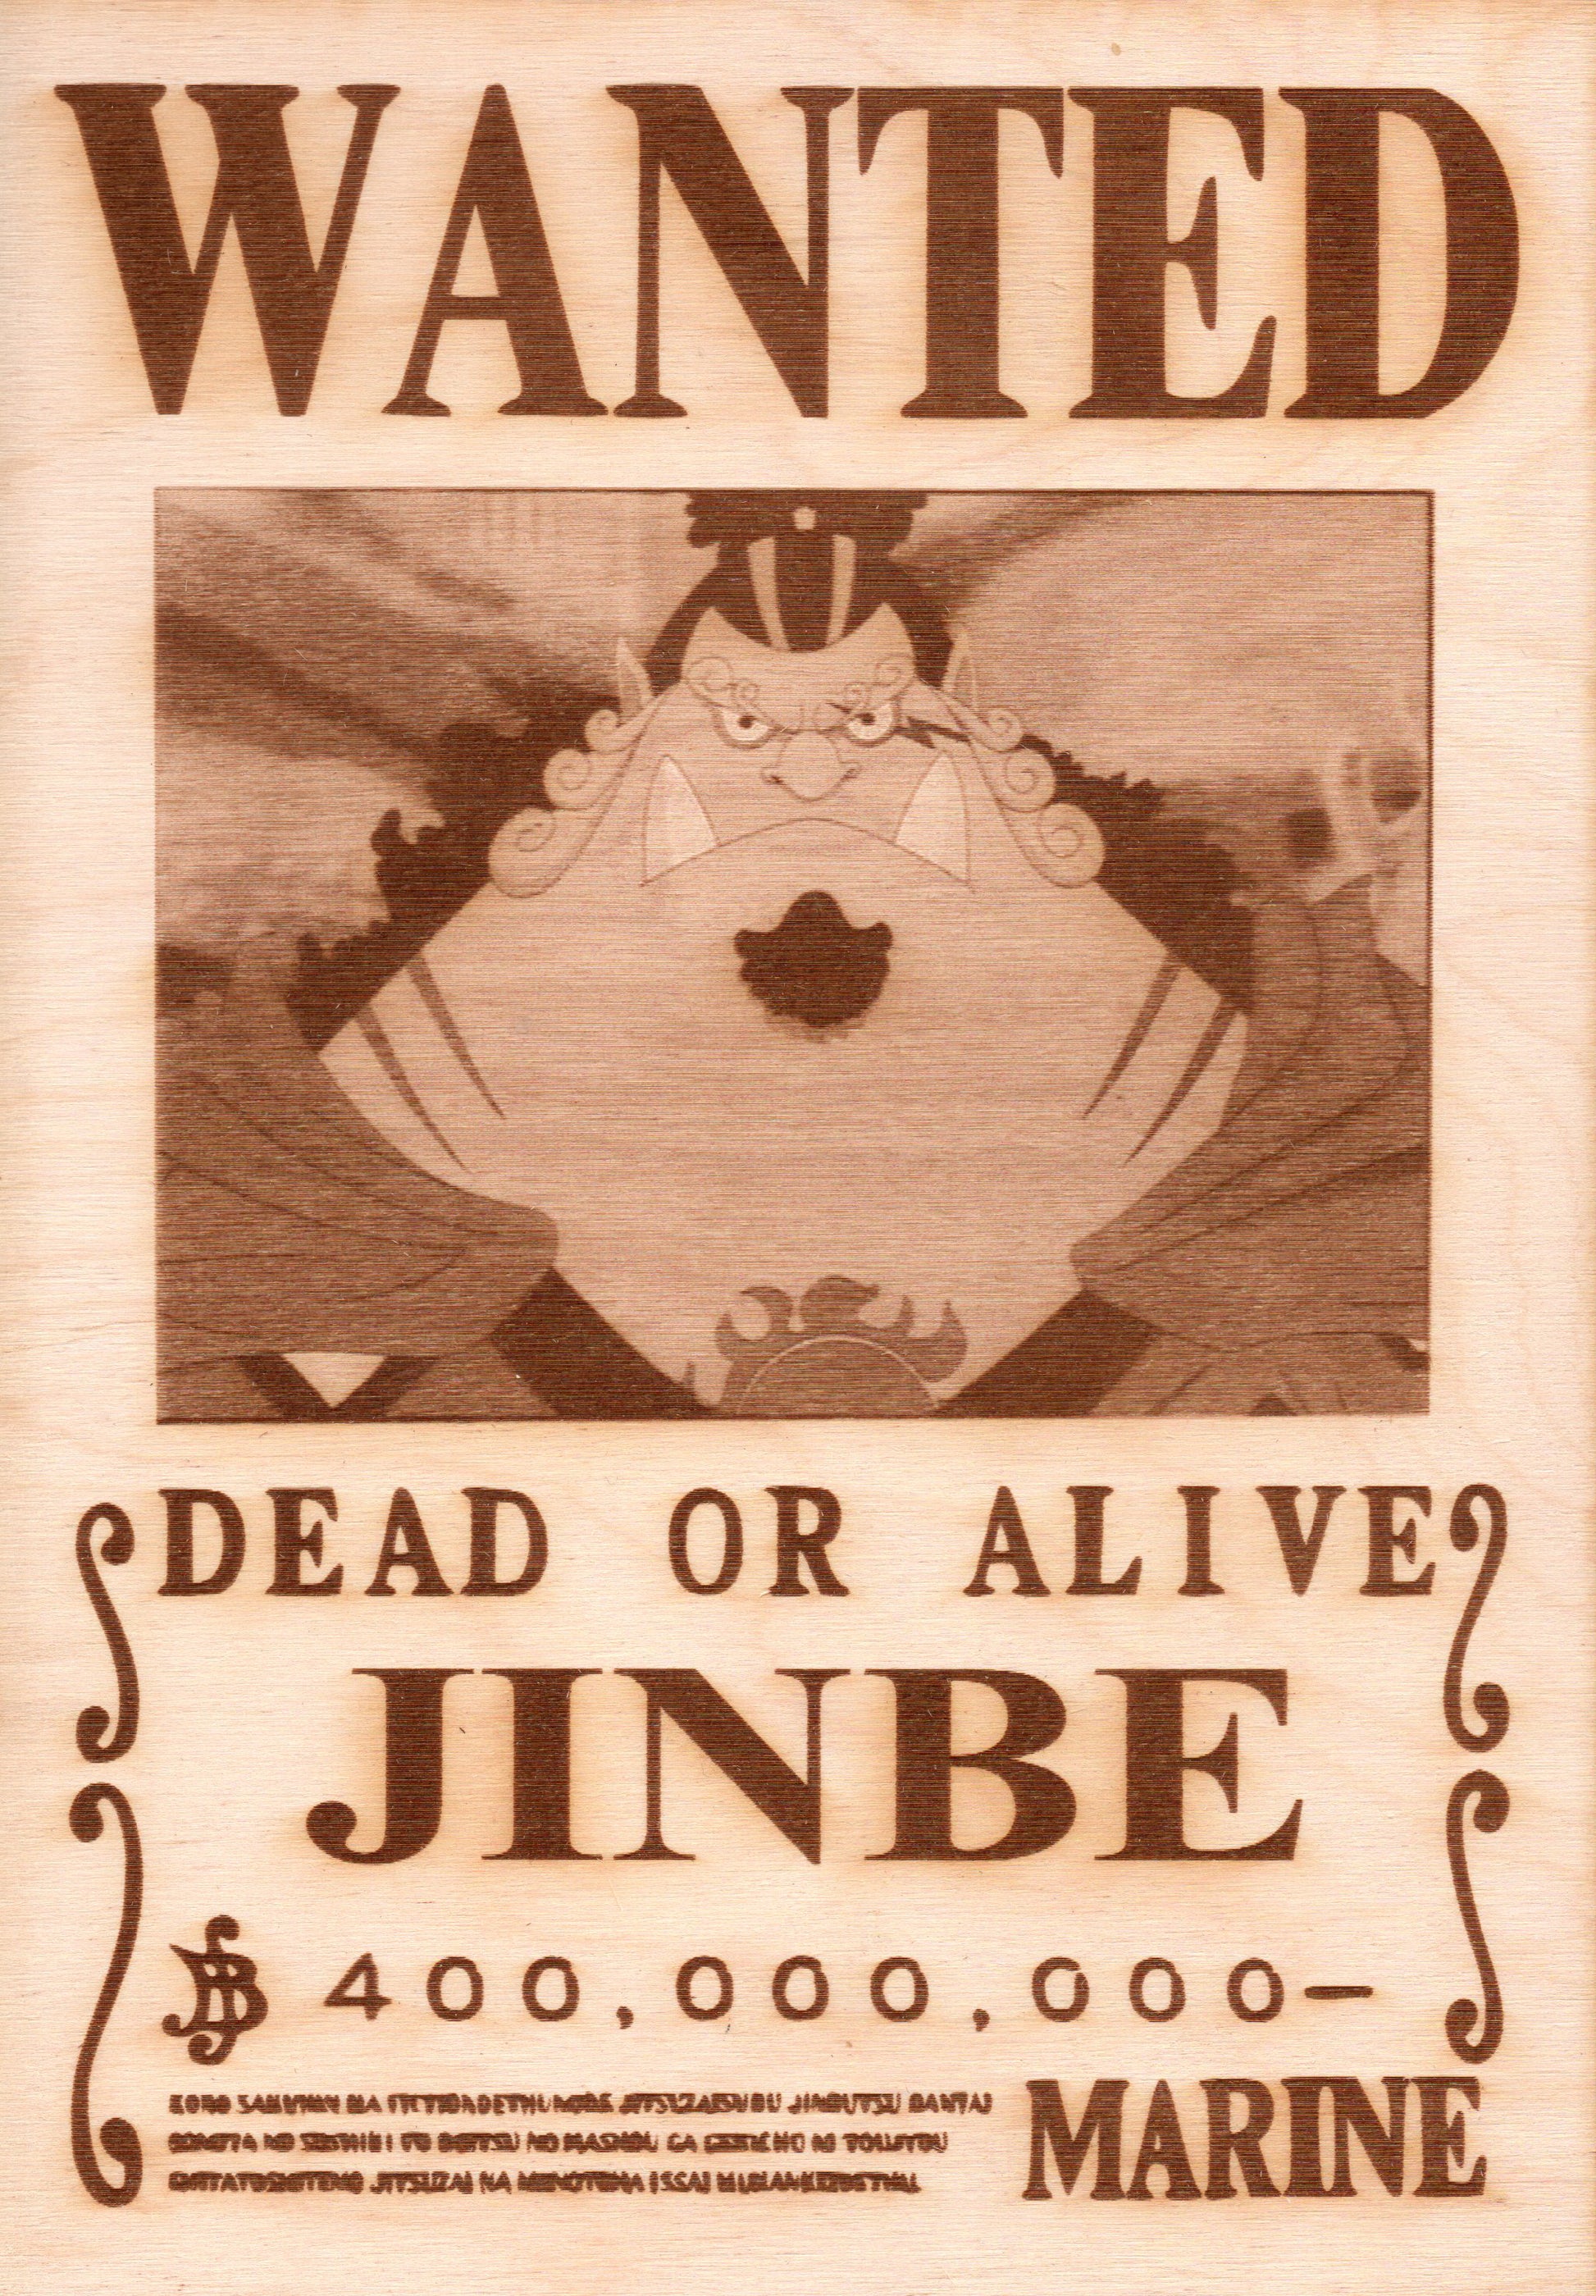 One Piece - Jinbe Wooden Wanted Poster - TantrumCollectibles.com